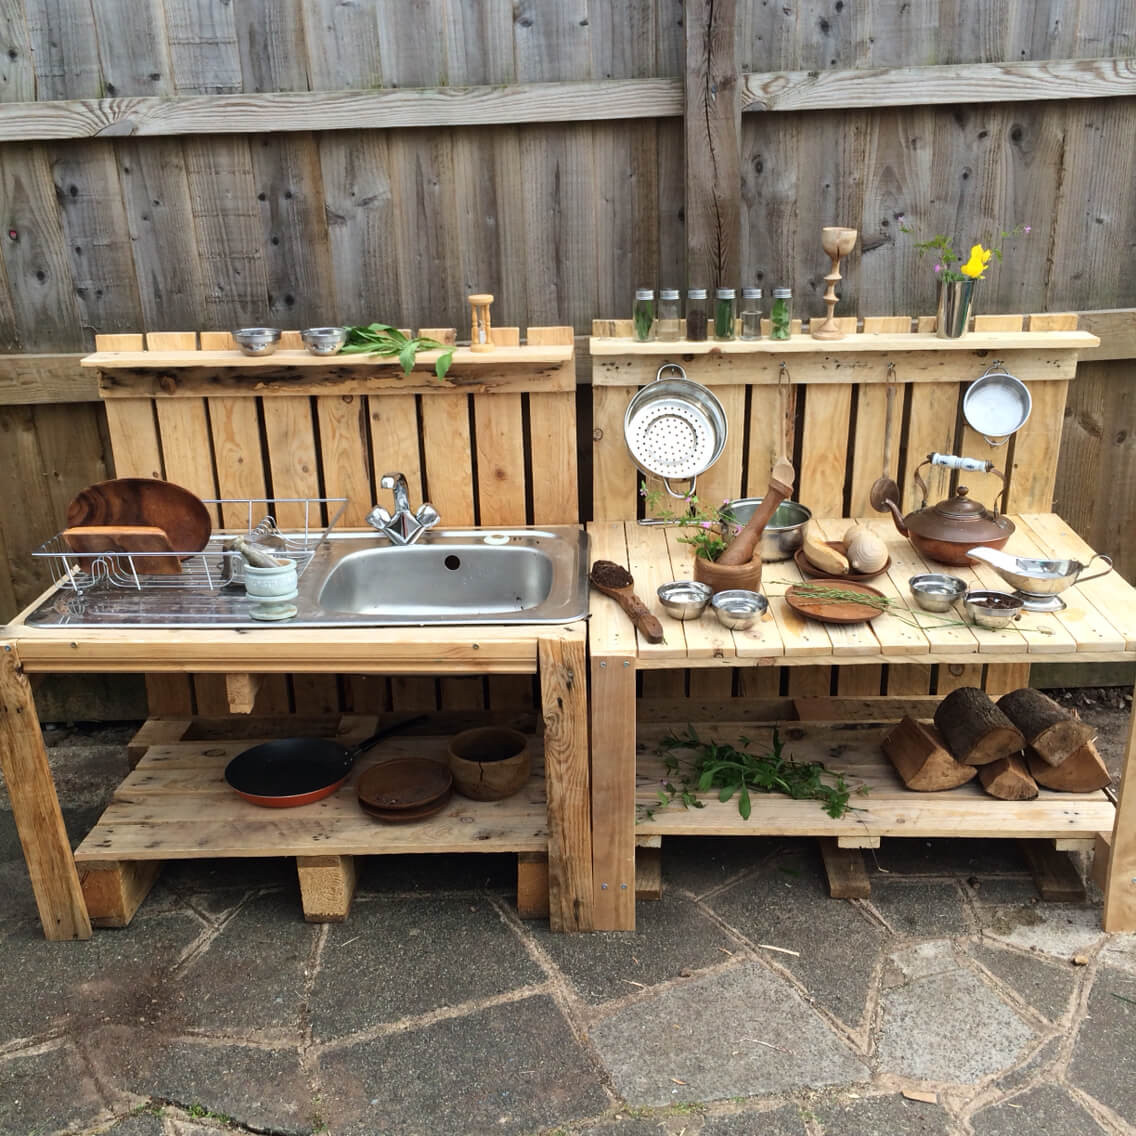 DIY Outdoor Sink Station
 27 Best Outdoor Kitchen Ideas and Designs for 2017